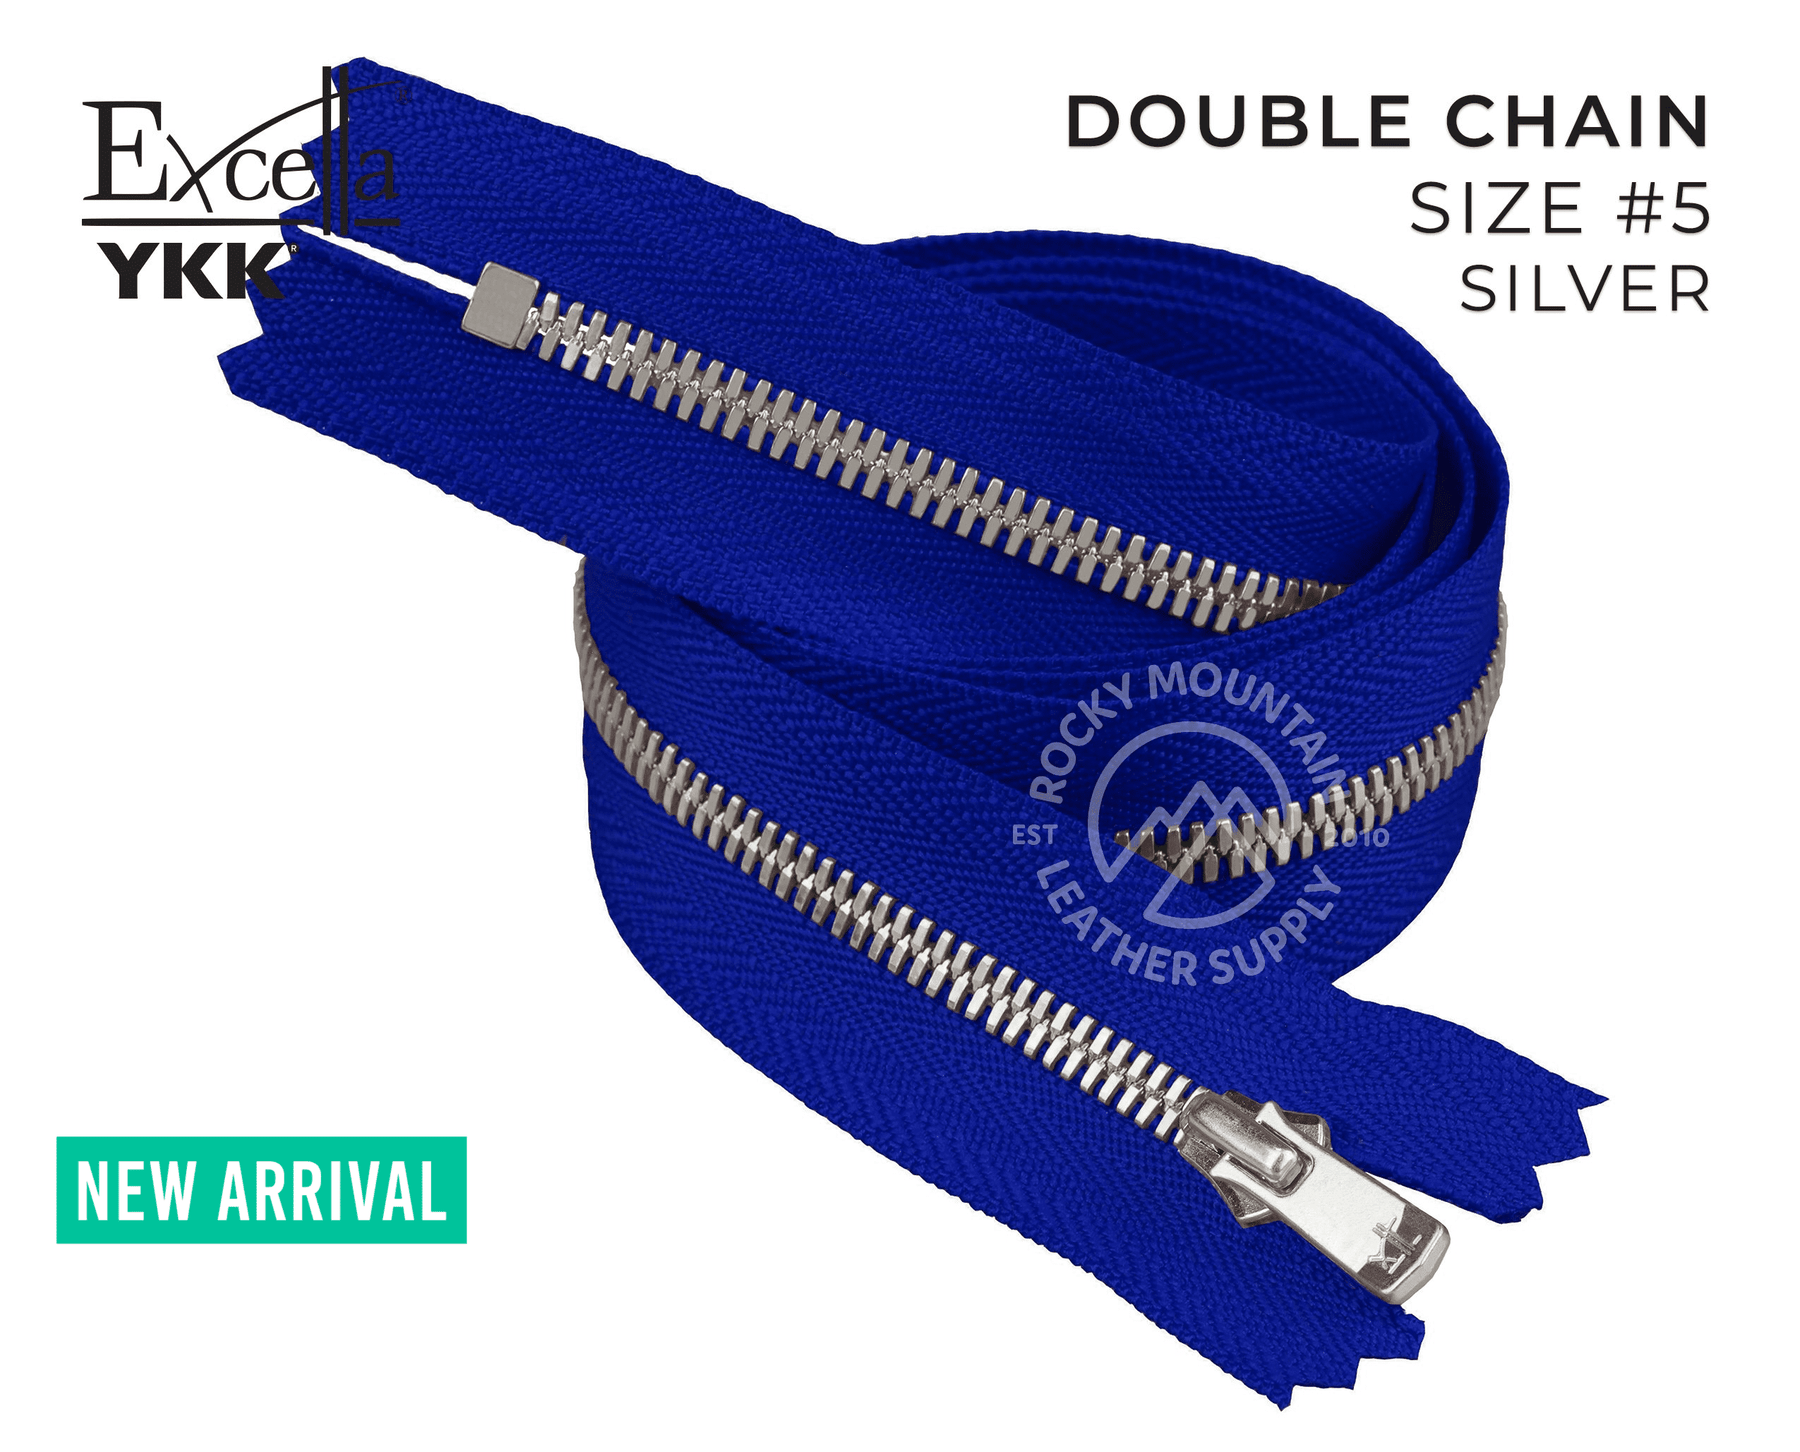 YKK 🇯🇵 - Excella Zippers - Size #5 - Double Chain (Silver) - 30 inches